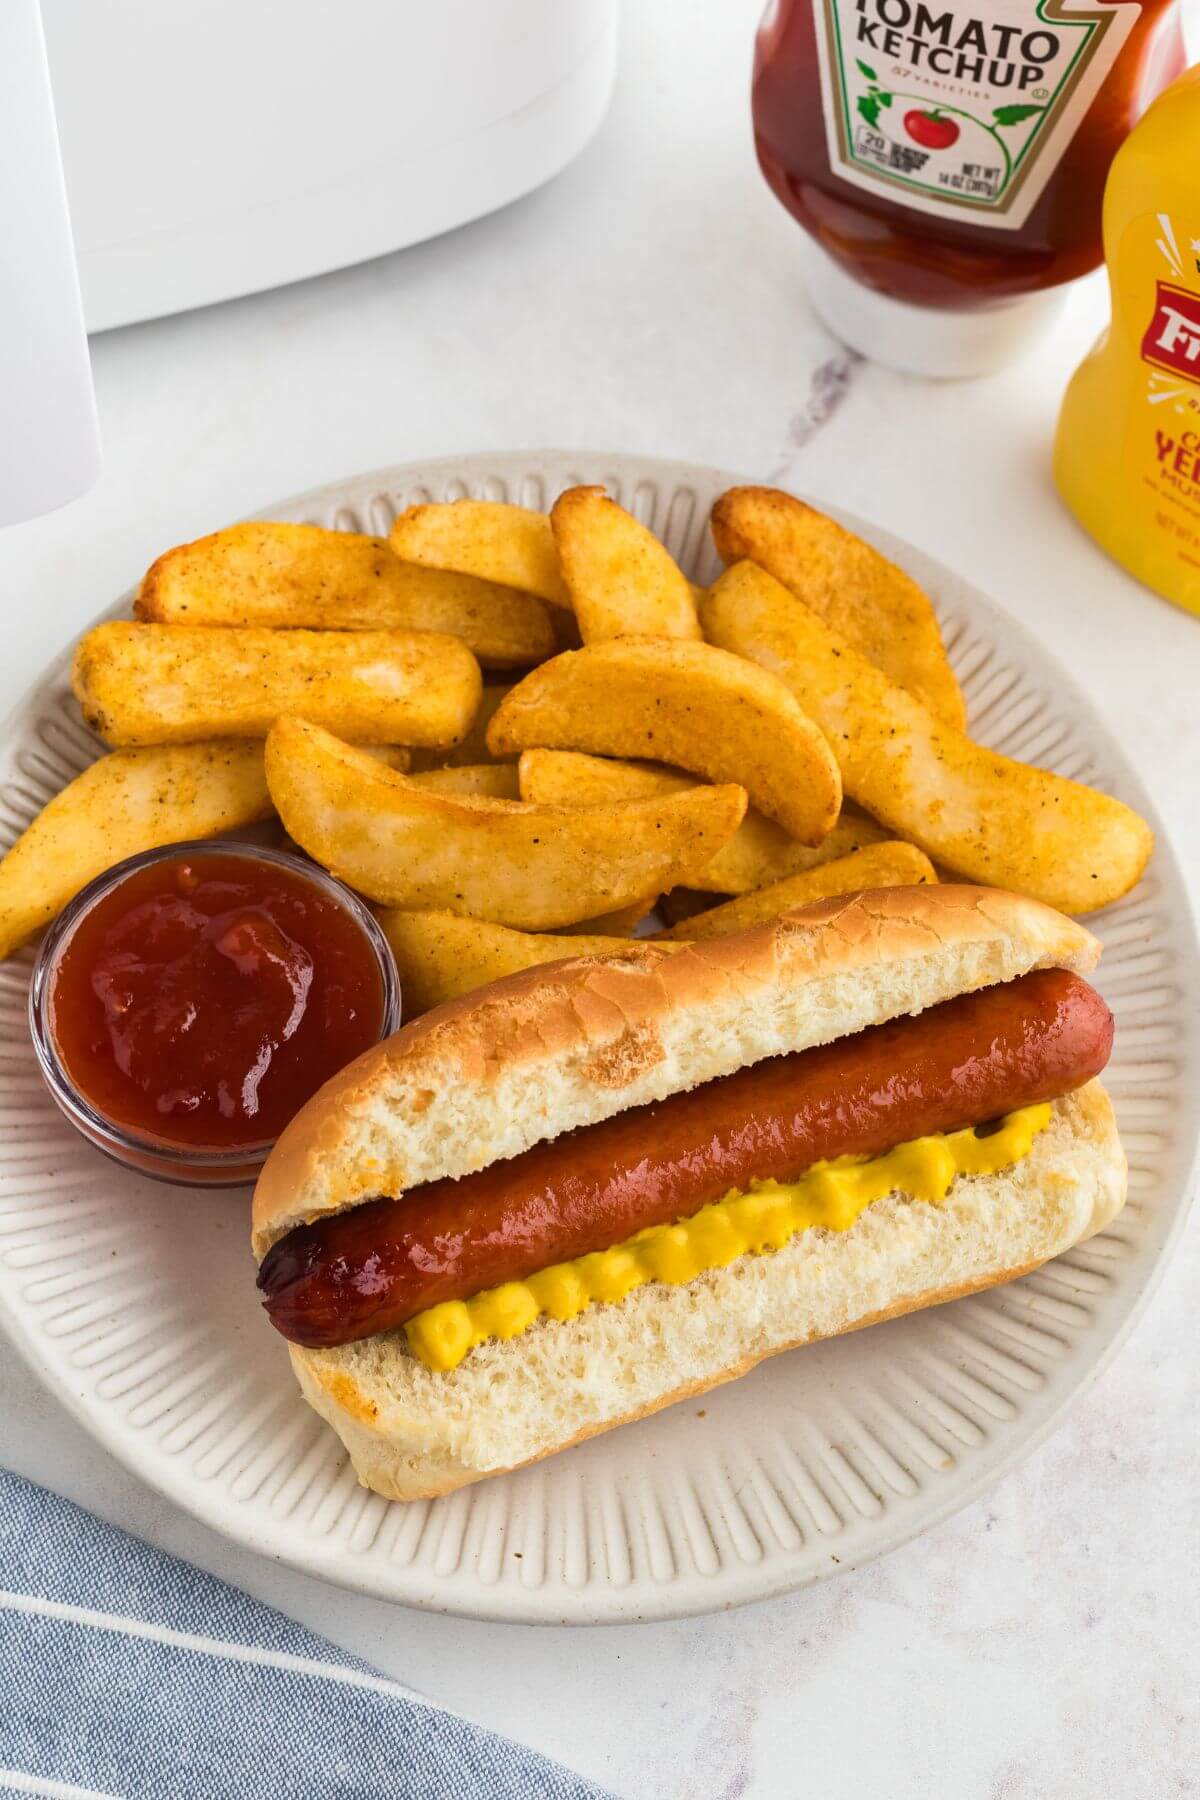 Juicy cooked hot dog in a bun with French fries on a white plate. 